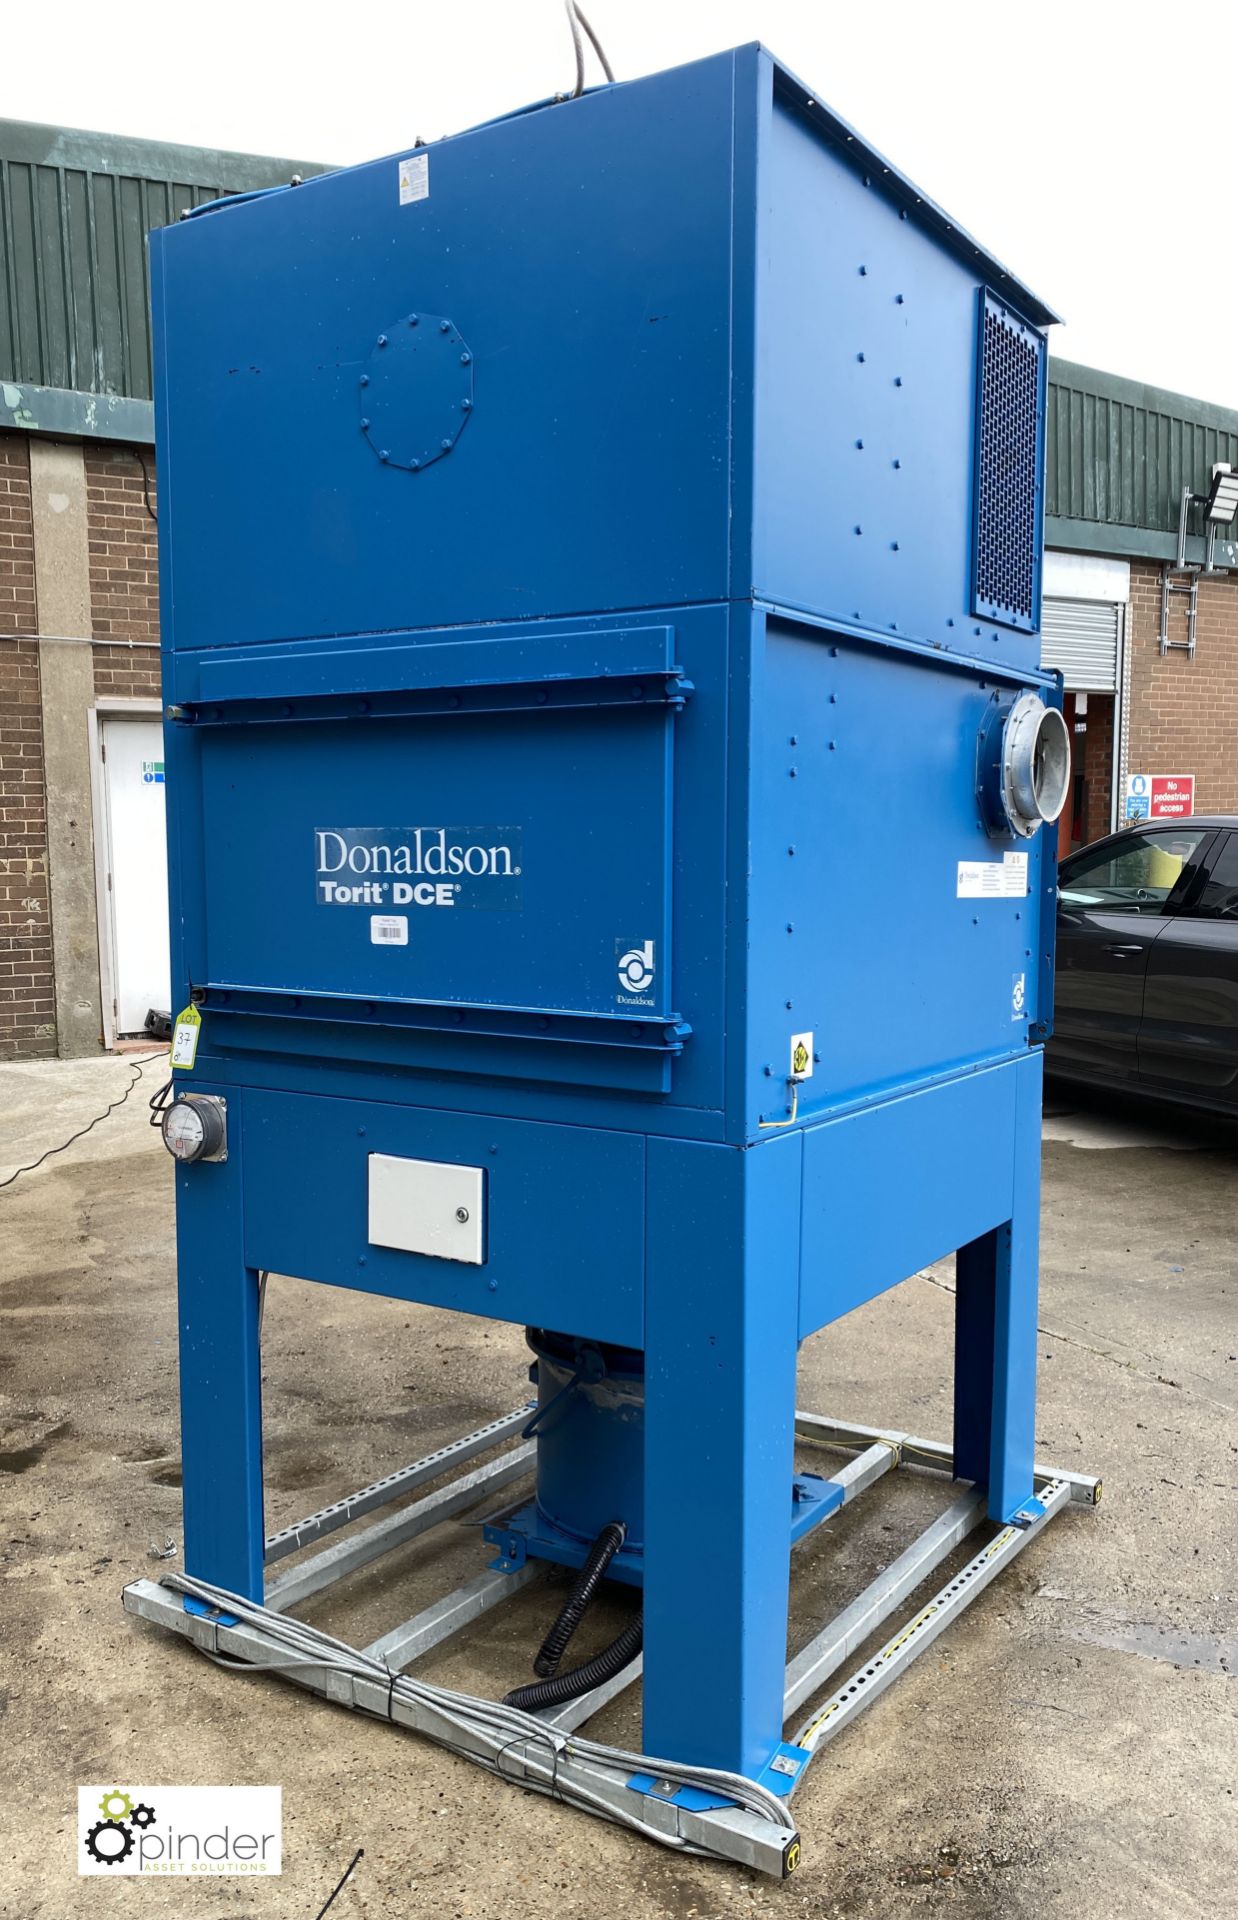 Donaldson Torit DCE C30-3G8 Dust Extraction Cabinet, year 2015, serial number 00058064 (please